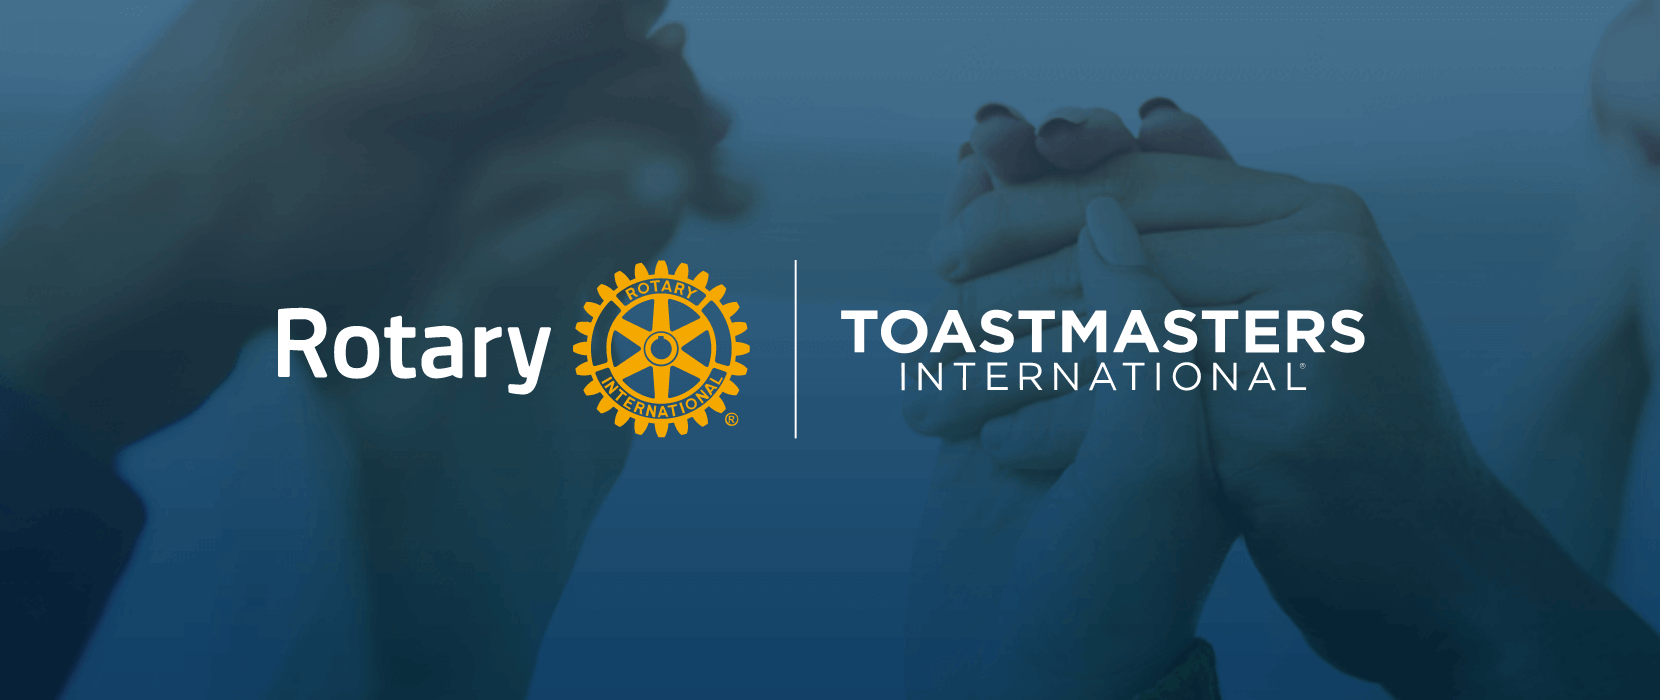 Rotary and Toastmasters International’s logos with blue background and hands holding in the air